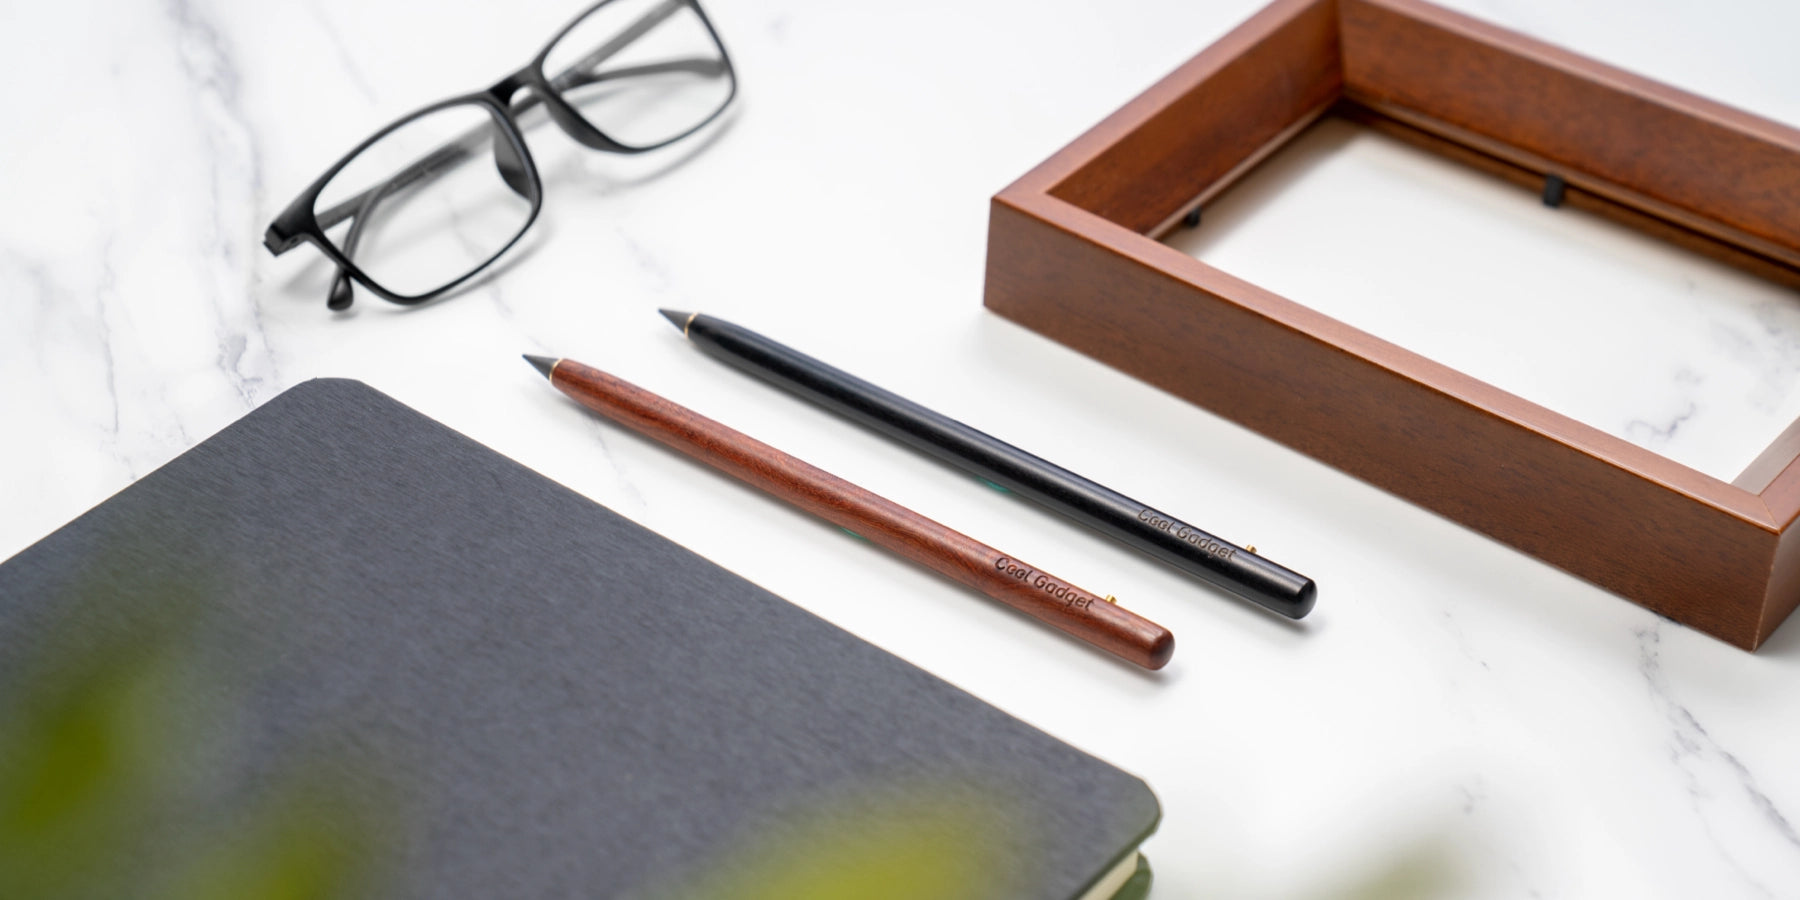 Upgrade your writing experience and say no to sharping, nib broken, or cutting trees.